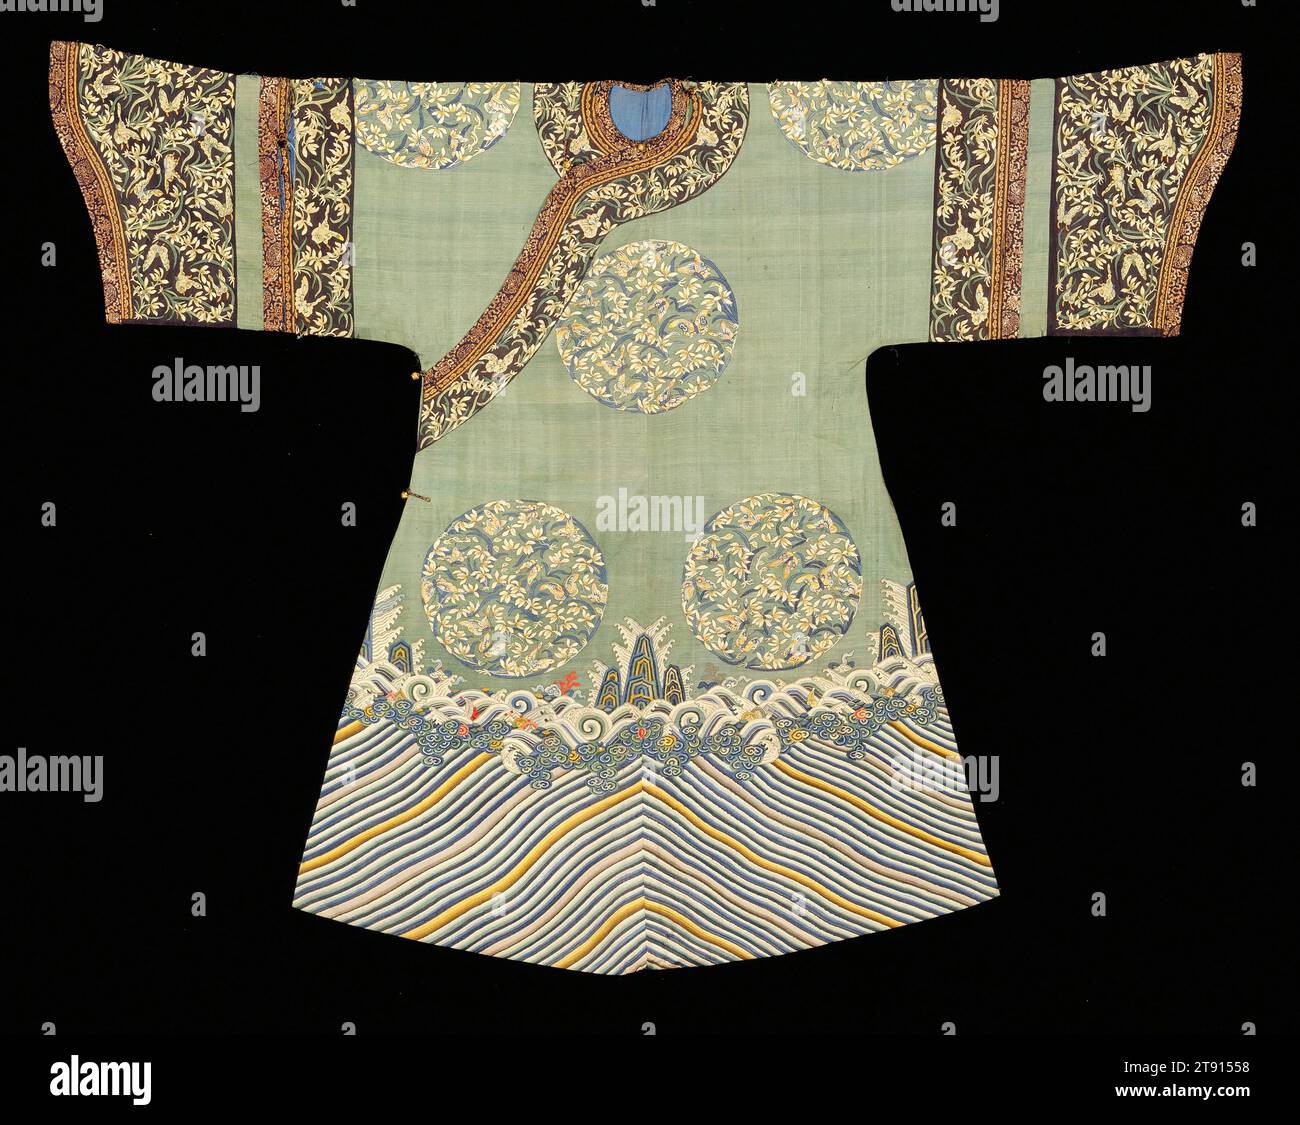 Manchu Woman's Informal Court Robe, late 19th century, 58 x 77 1/2 in. (147.32 x 196.8 cm), Silk tapestry (kesi), China, 19th century, The informal level of court attire called ch'ang-fu included garments worn outside official court ceremonies. The more formal ch'ang-fu robes used the eight medallion scheme, imperial wave pattern in the hem, and large flared cuffs seen here. This striking gown features medallions and cuffs decorated with grass orchids (cymbidiums) and butterflies in well-coordinated patterns that create a sense of harmony. In addition to being a favorite flower of literati Stock Photo